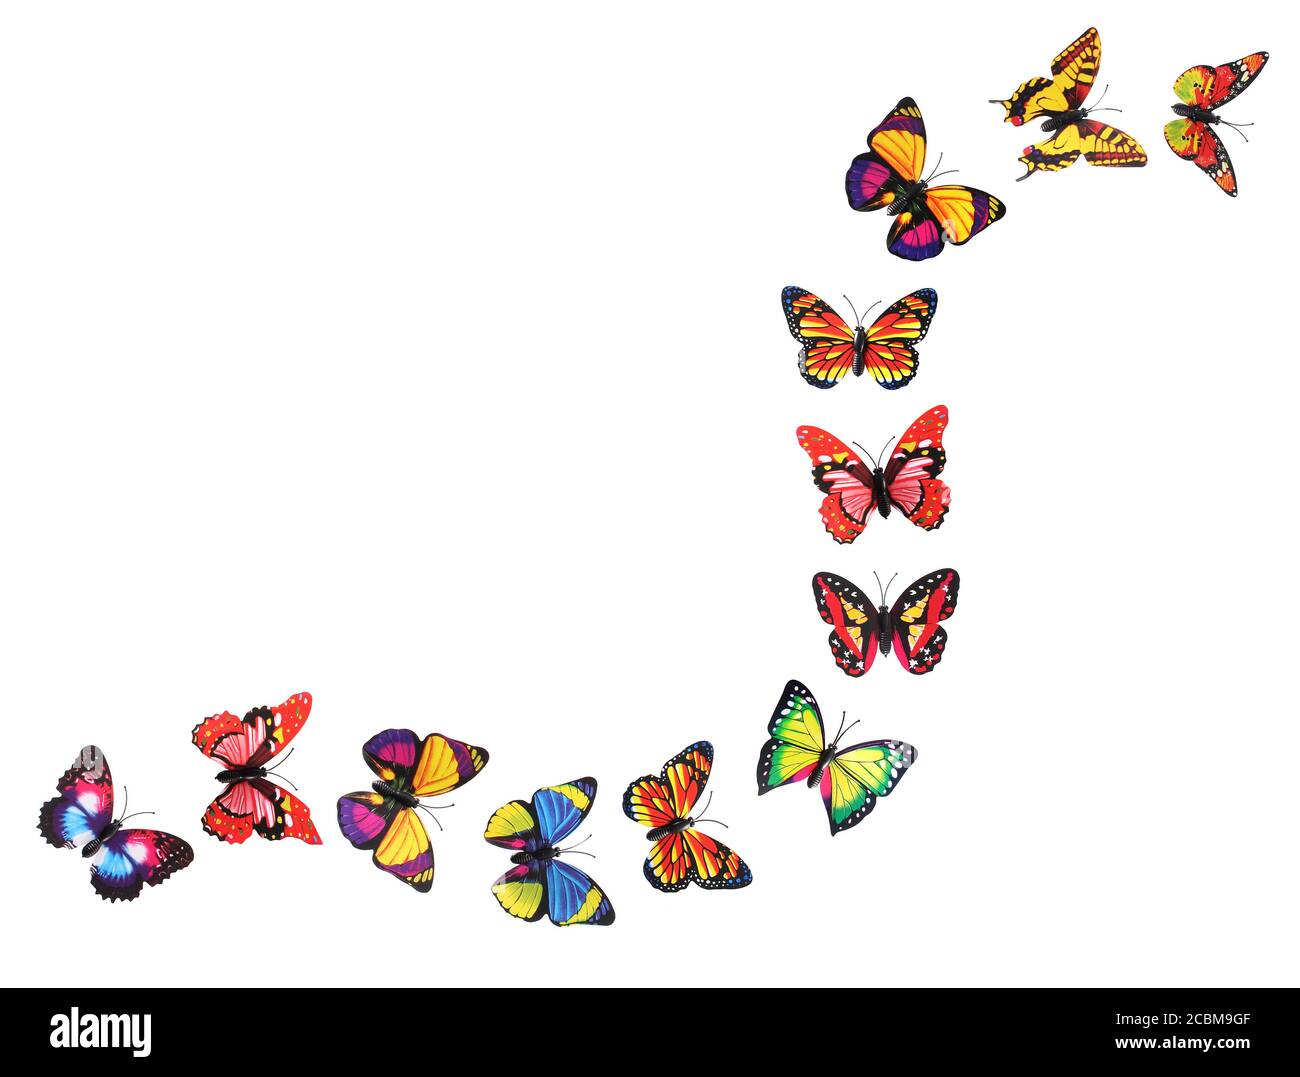 Paper Butterflies on White Background Stock Photo